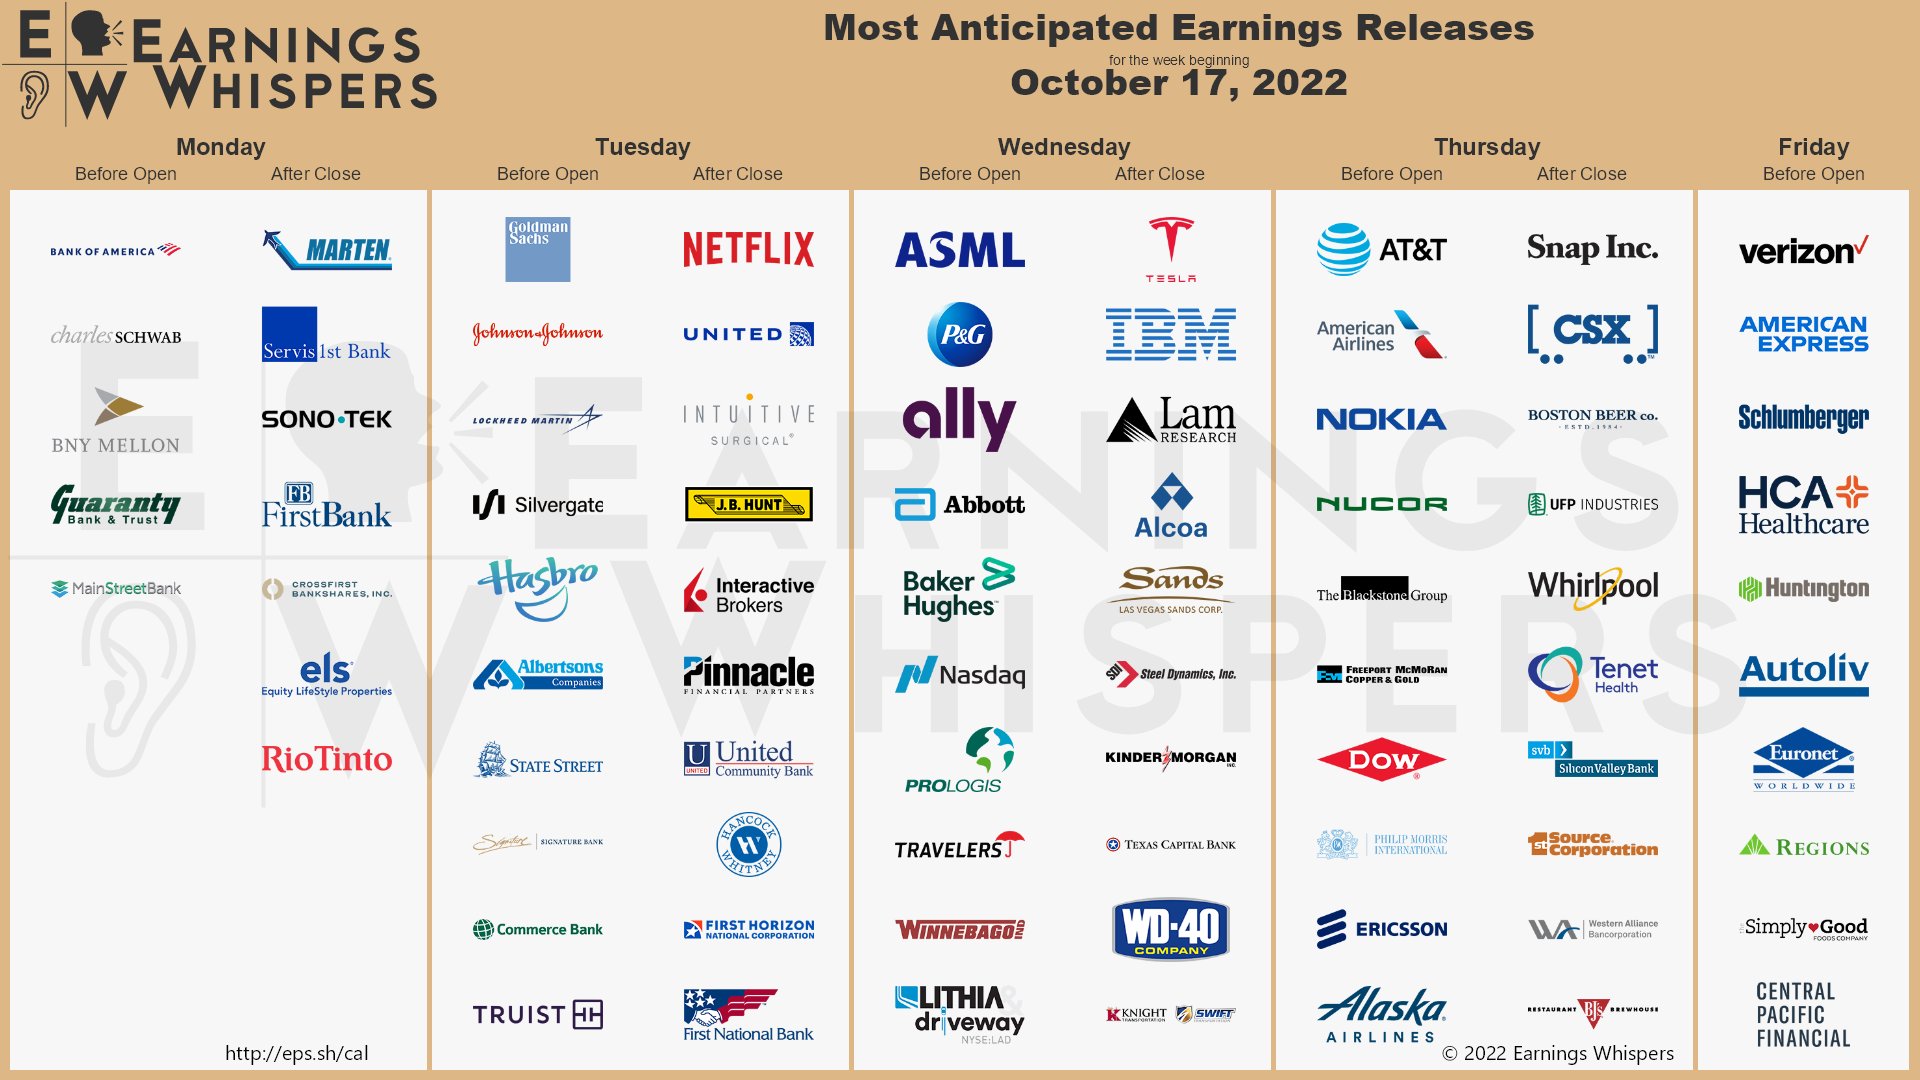 The most anticipated earnings releases scheduled for the week are Tesla #TSLA, Bank of America #BAC, Netflix #NFLX, Charles Schwab #SCHW, Goldman Sachs #GS, Johnson & Johnson #JNJ, BNY Mellon #BK, AT&T #T, United Airlines #UAL, and Verizon Communications #VZ. 